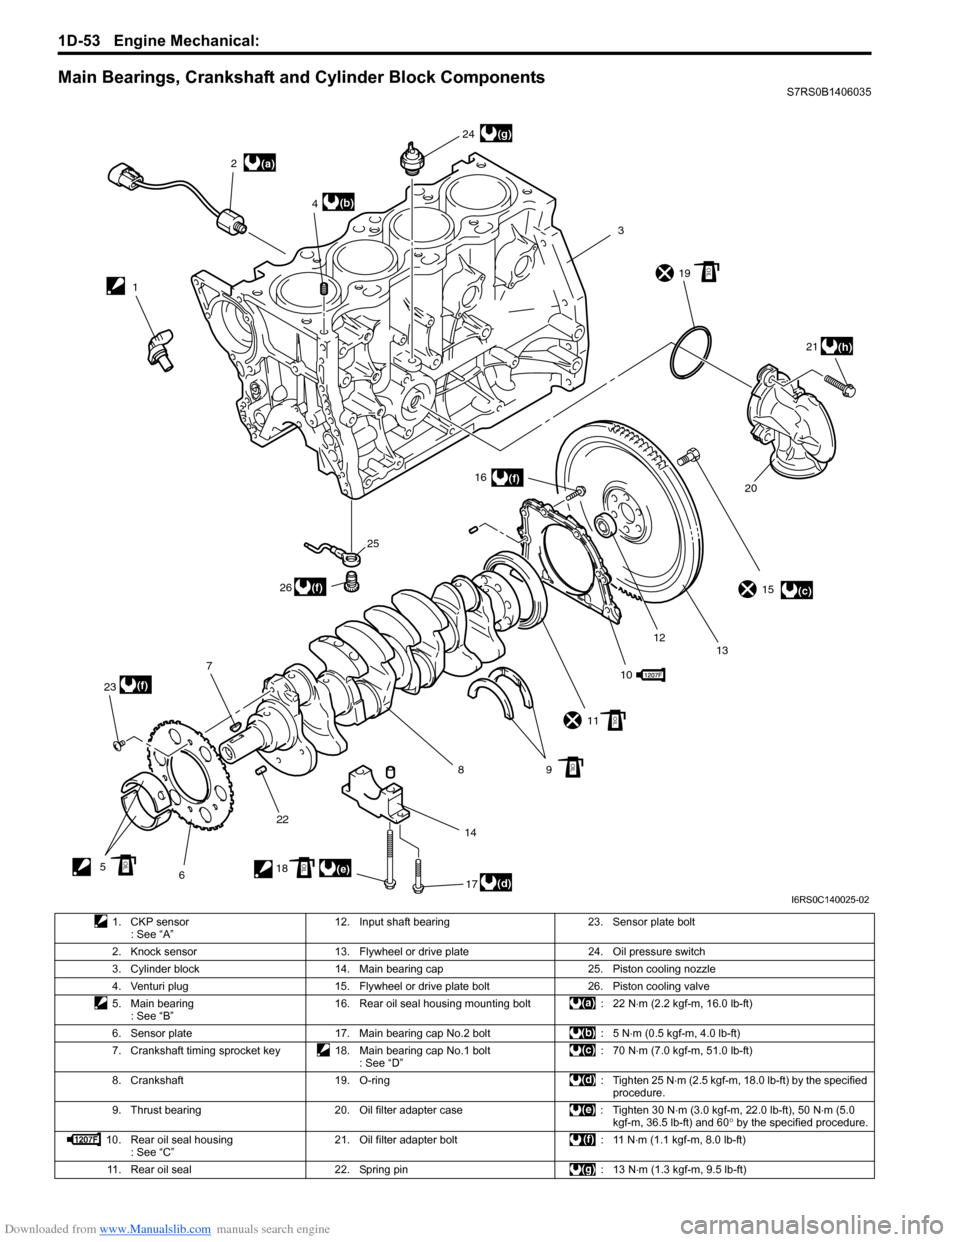 SUZUKI SWIFT 2006 2.G Service Owners Guide Downloaded from www.Manualslib.com manuals search engine 1D-53 Engine Mechanical: 
Main Bearings, Crankshaft and Cylinder Block ComponentsS7RS0B1406035
(a)
(c)
(d)(e)
(b)
(f)
(f)
(f)
(g)
(h)
12
3
4
5 